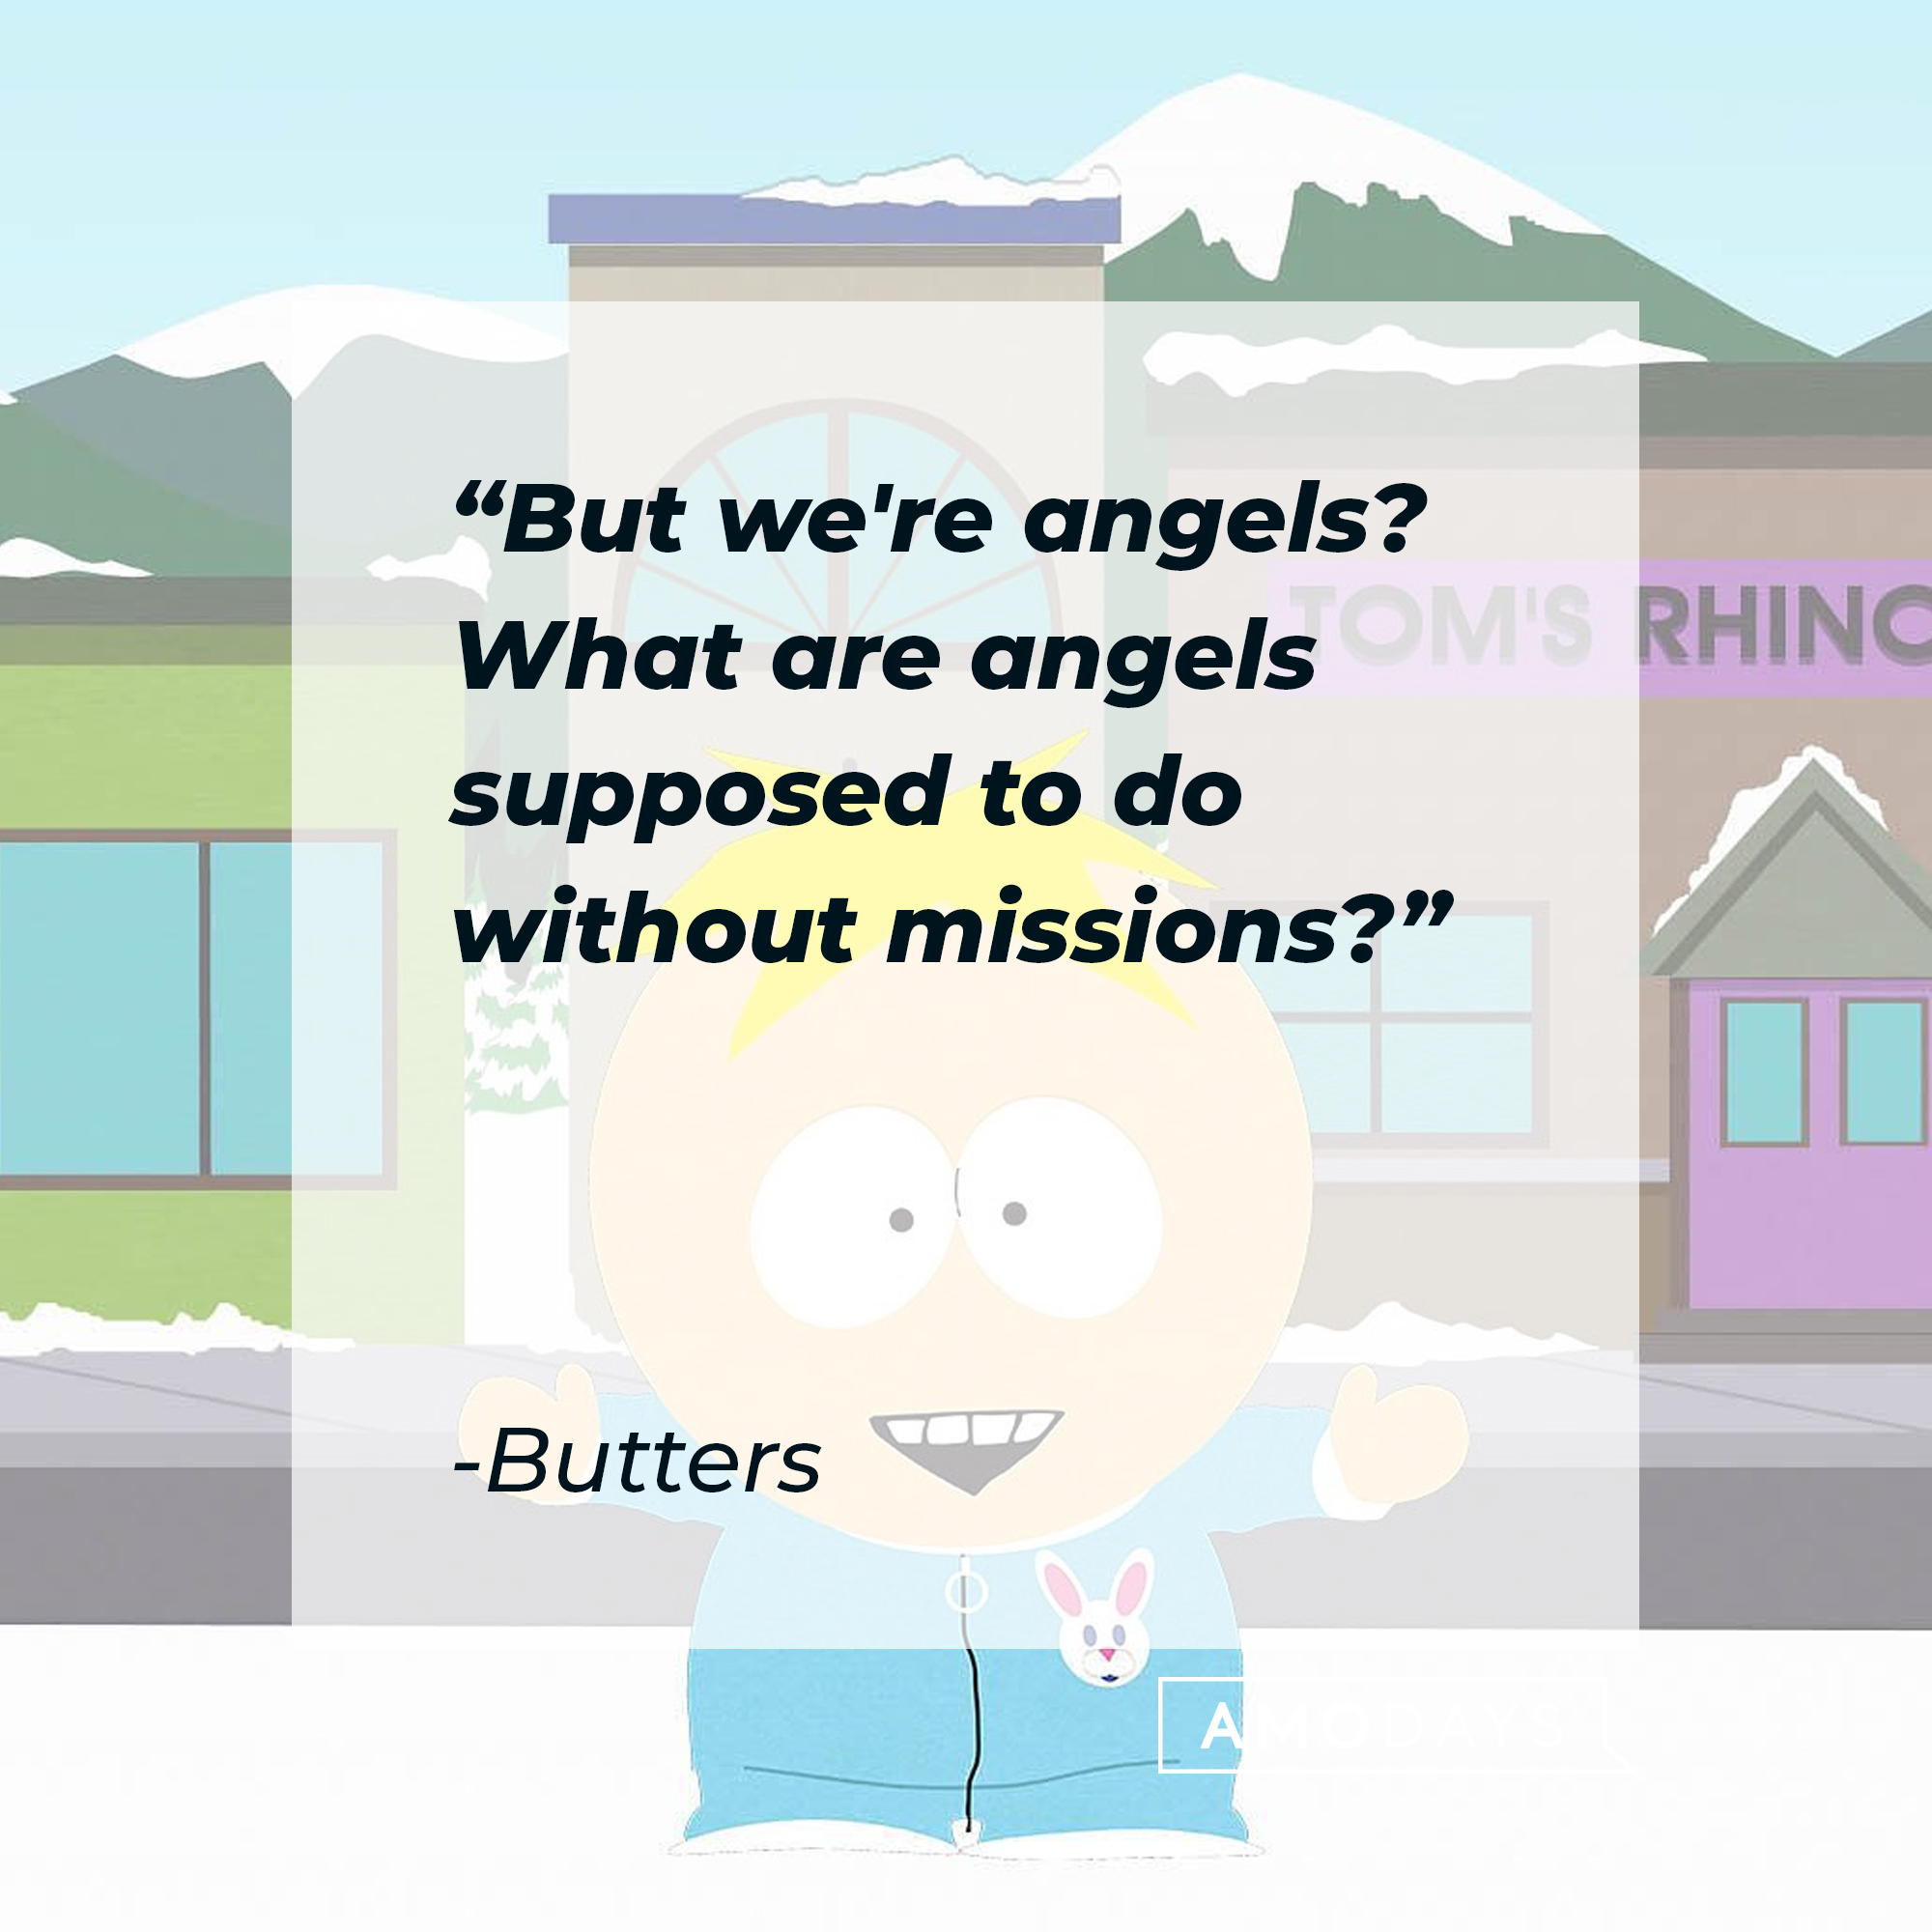 Butters' quote: "But we're angels? What are angels supposed to do without missions?" | Source: facebook.com/southpark